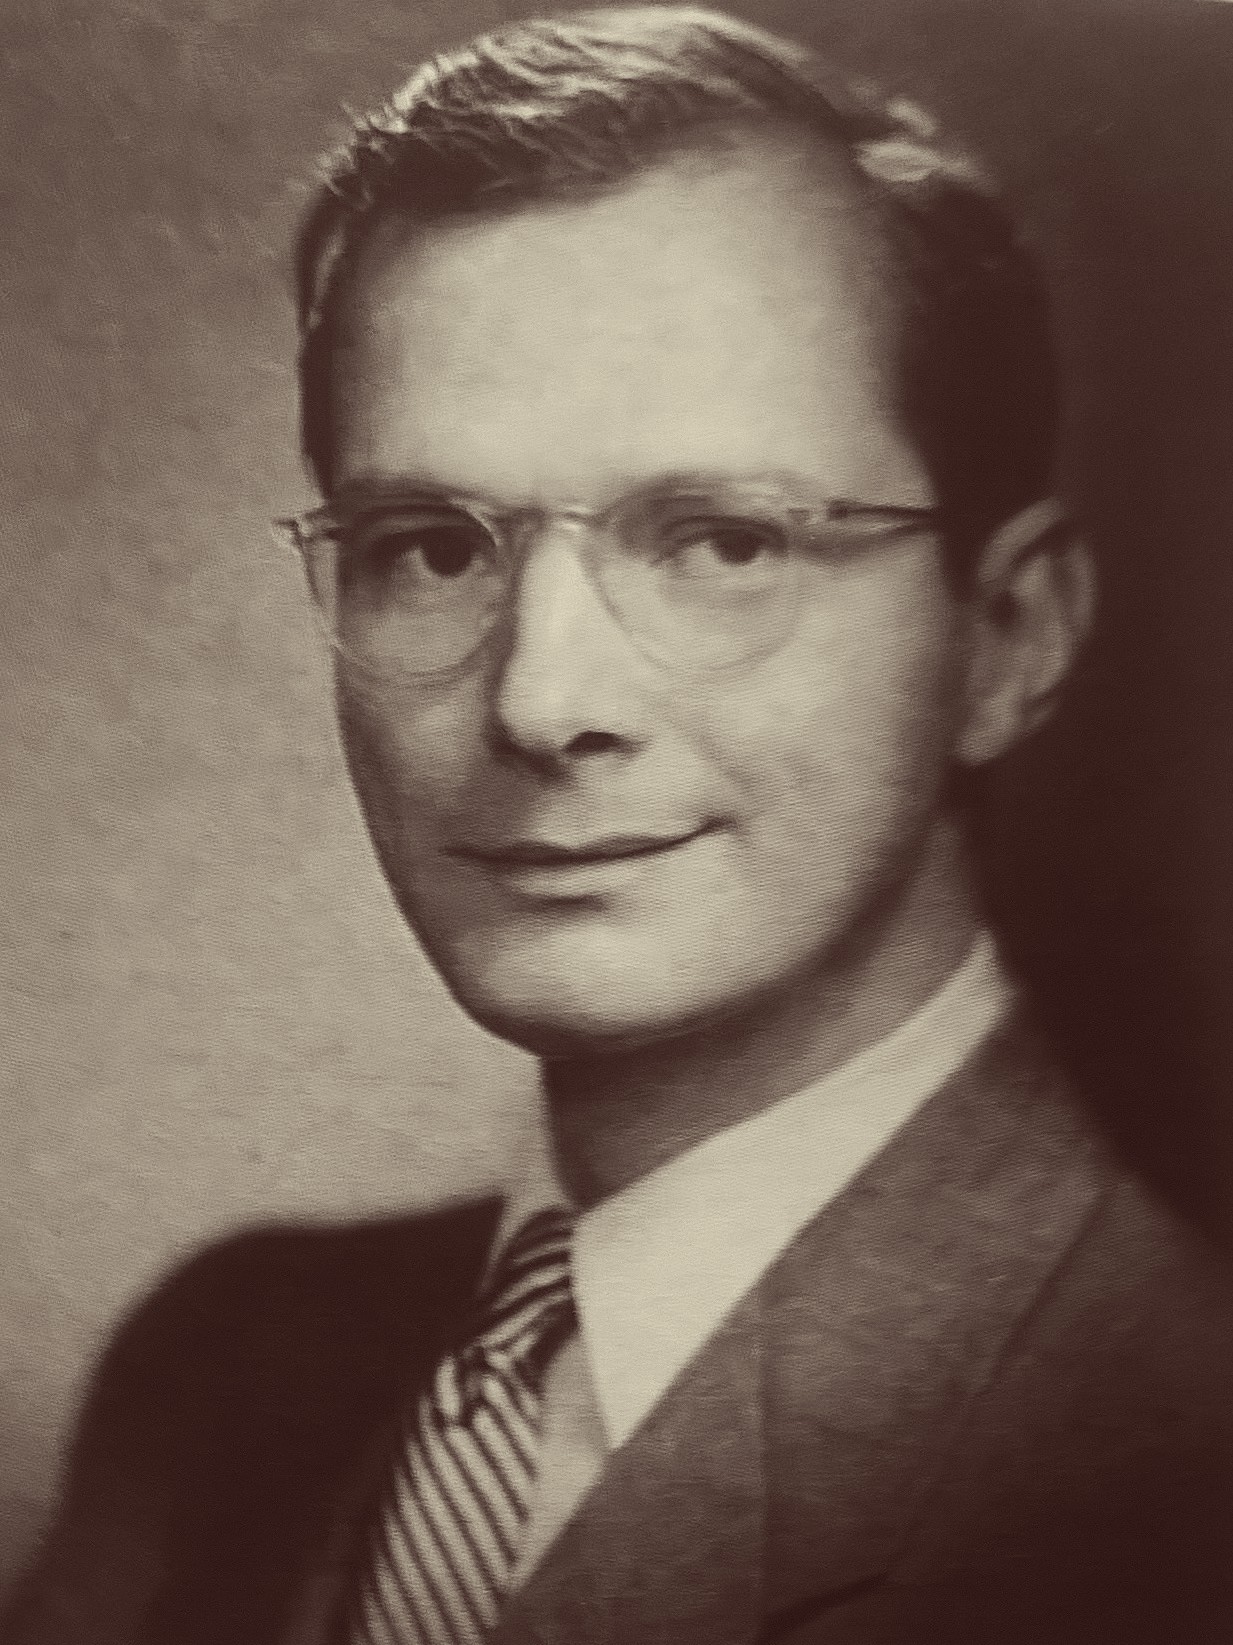 A sepia photo of a white man with dark hair smiles at the camera. He is wearing clear rimmed glasses, a light colored shirt, a striped tie, and a dark suit jacket.